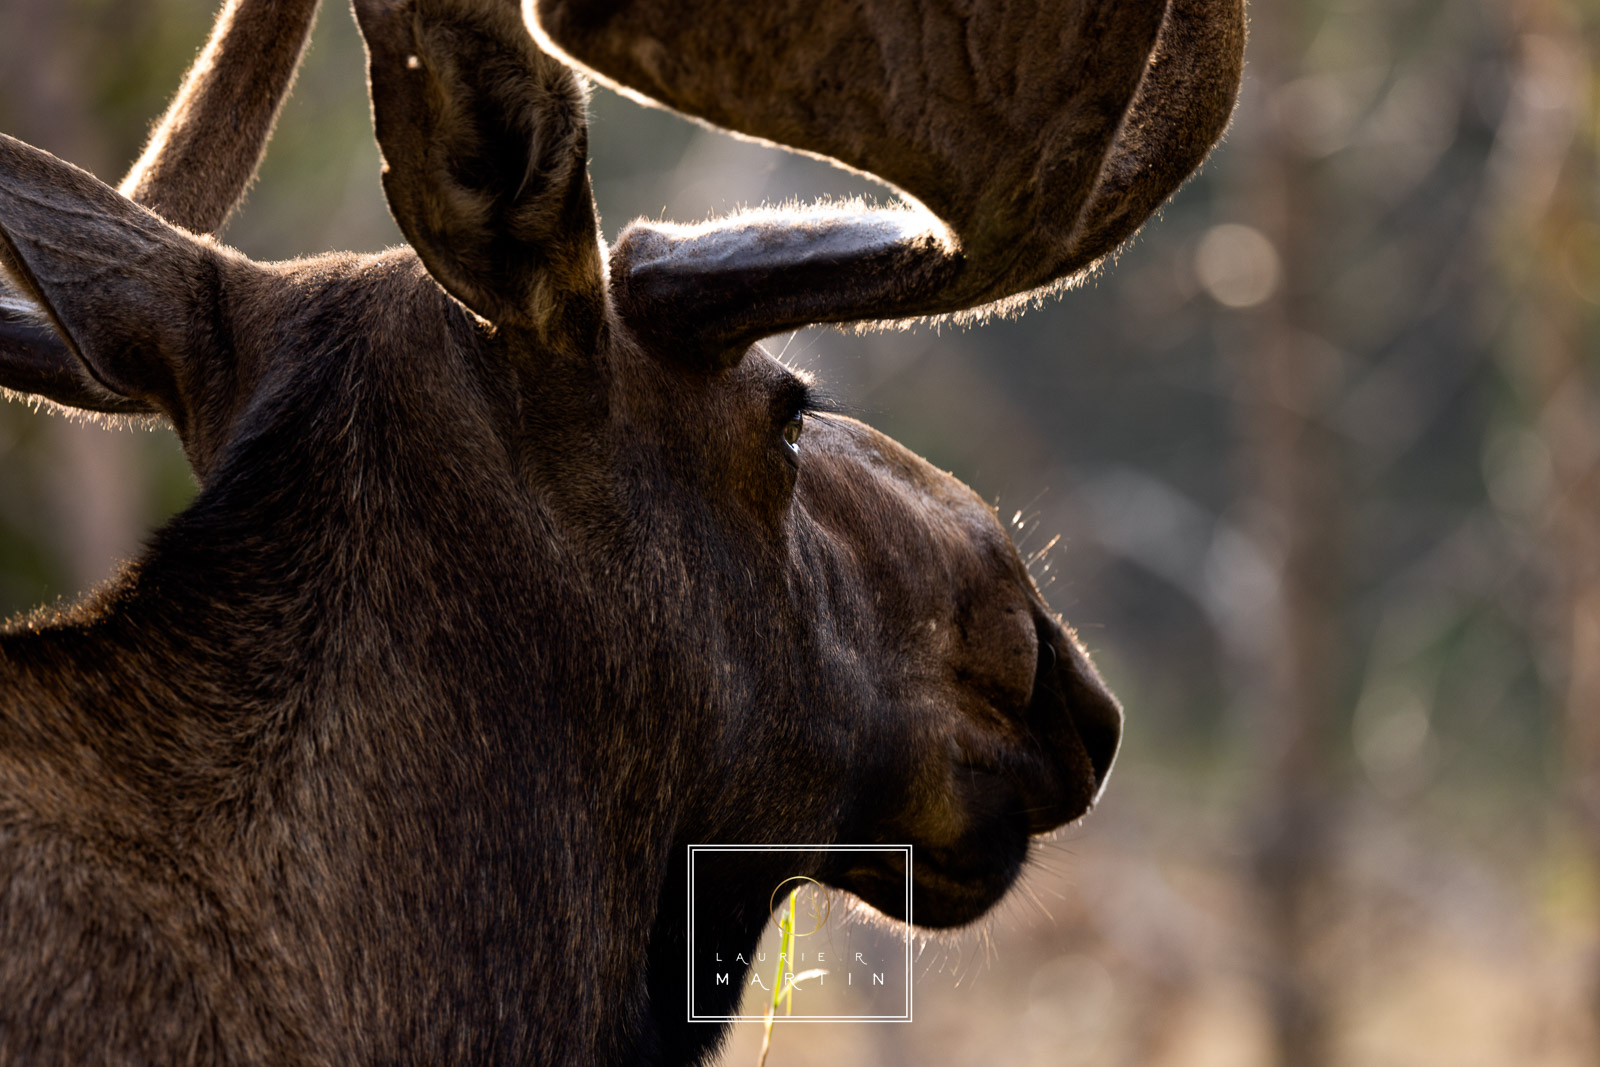 One confident Bull Moose looks into a thick shared forest planning his day. I loved the light that rested on his paddles like a Halo.